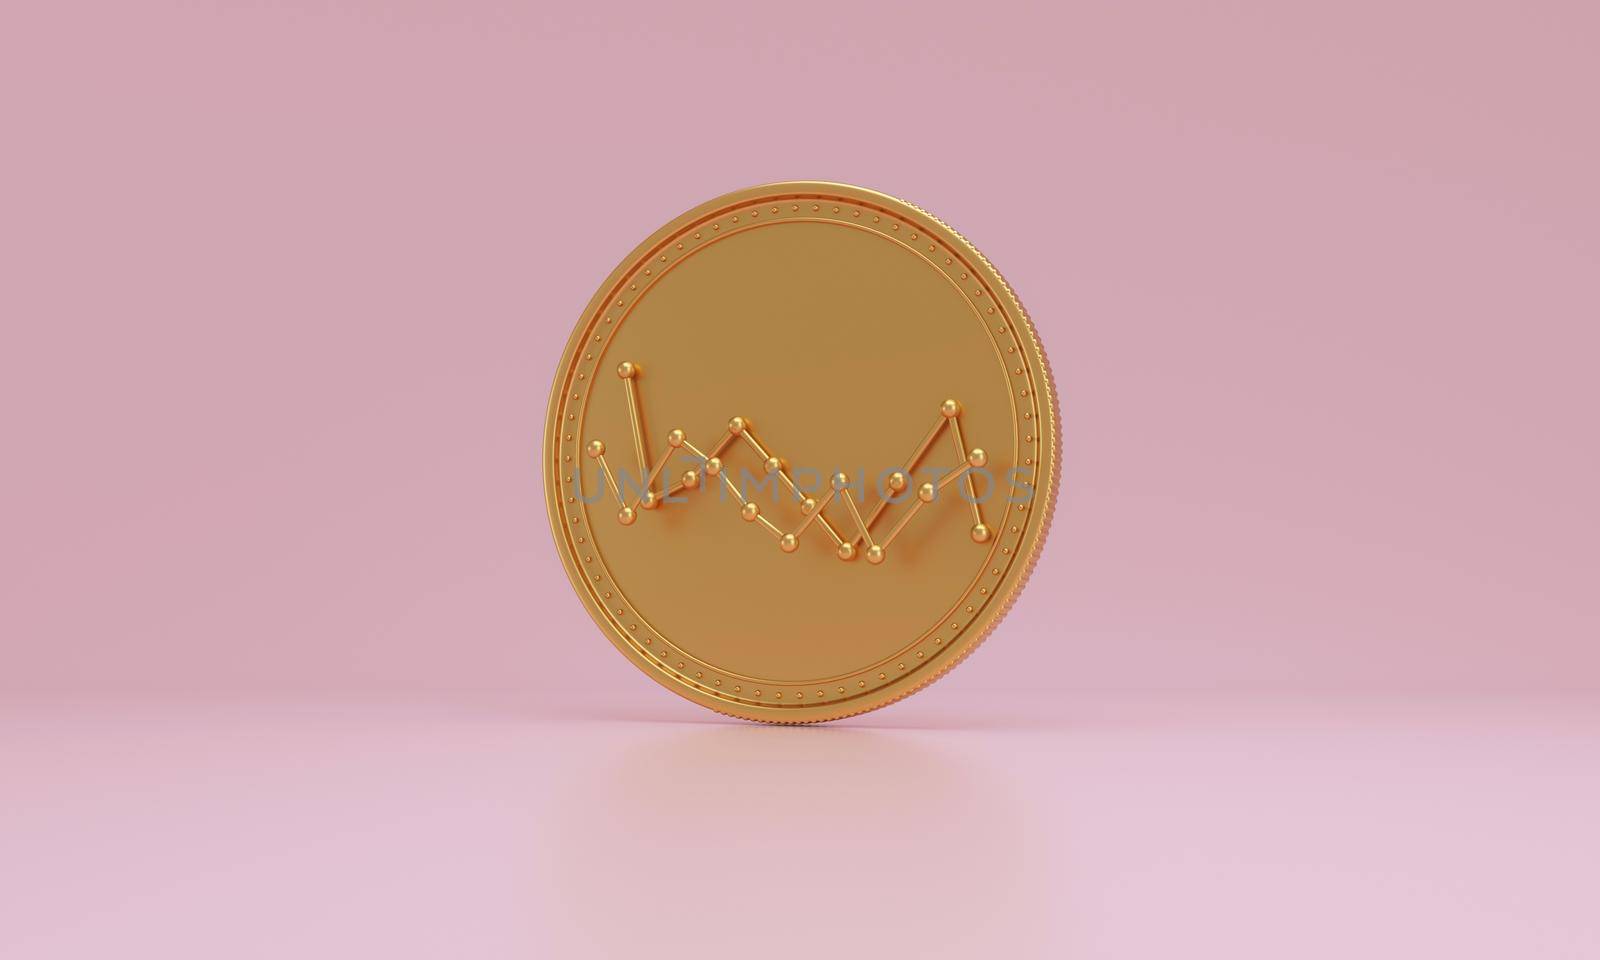 Stock market graph on golden coin. Foreign exchange currency changes and crises concept. 3d rendering.